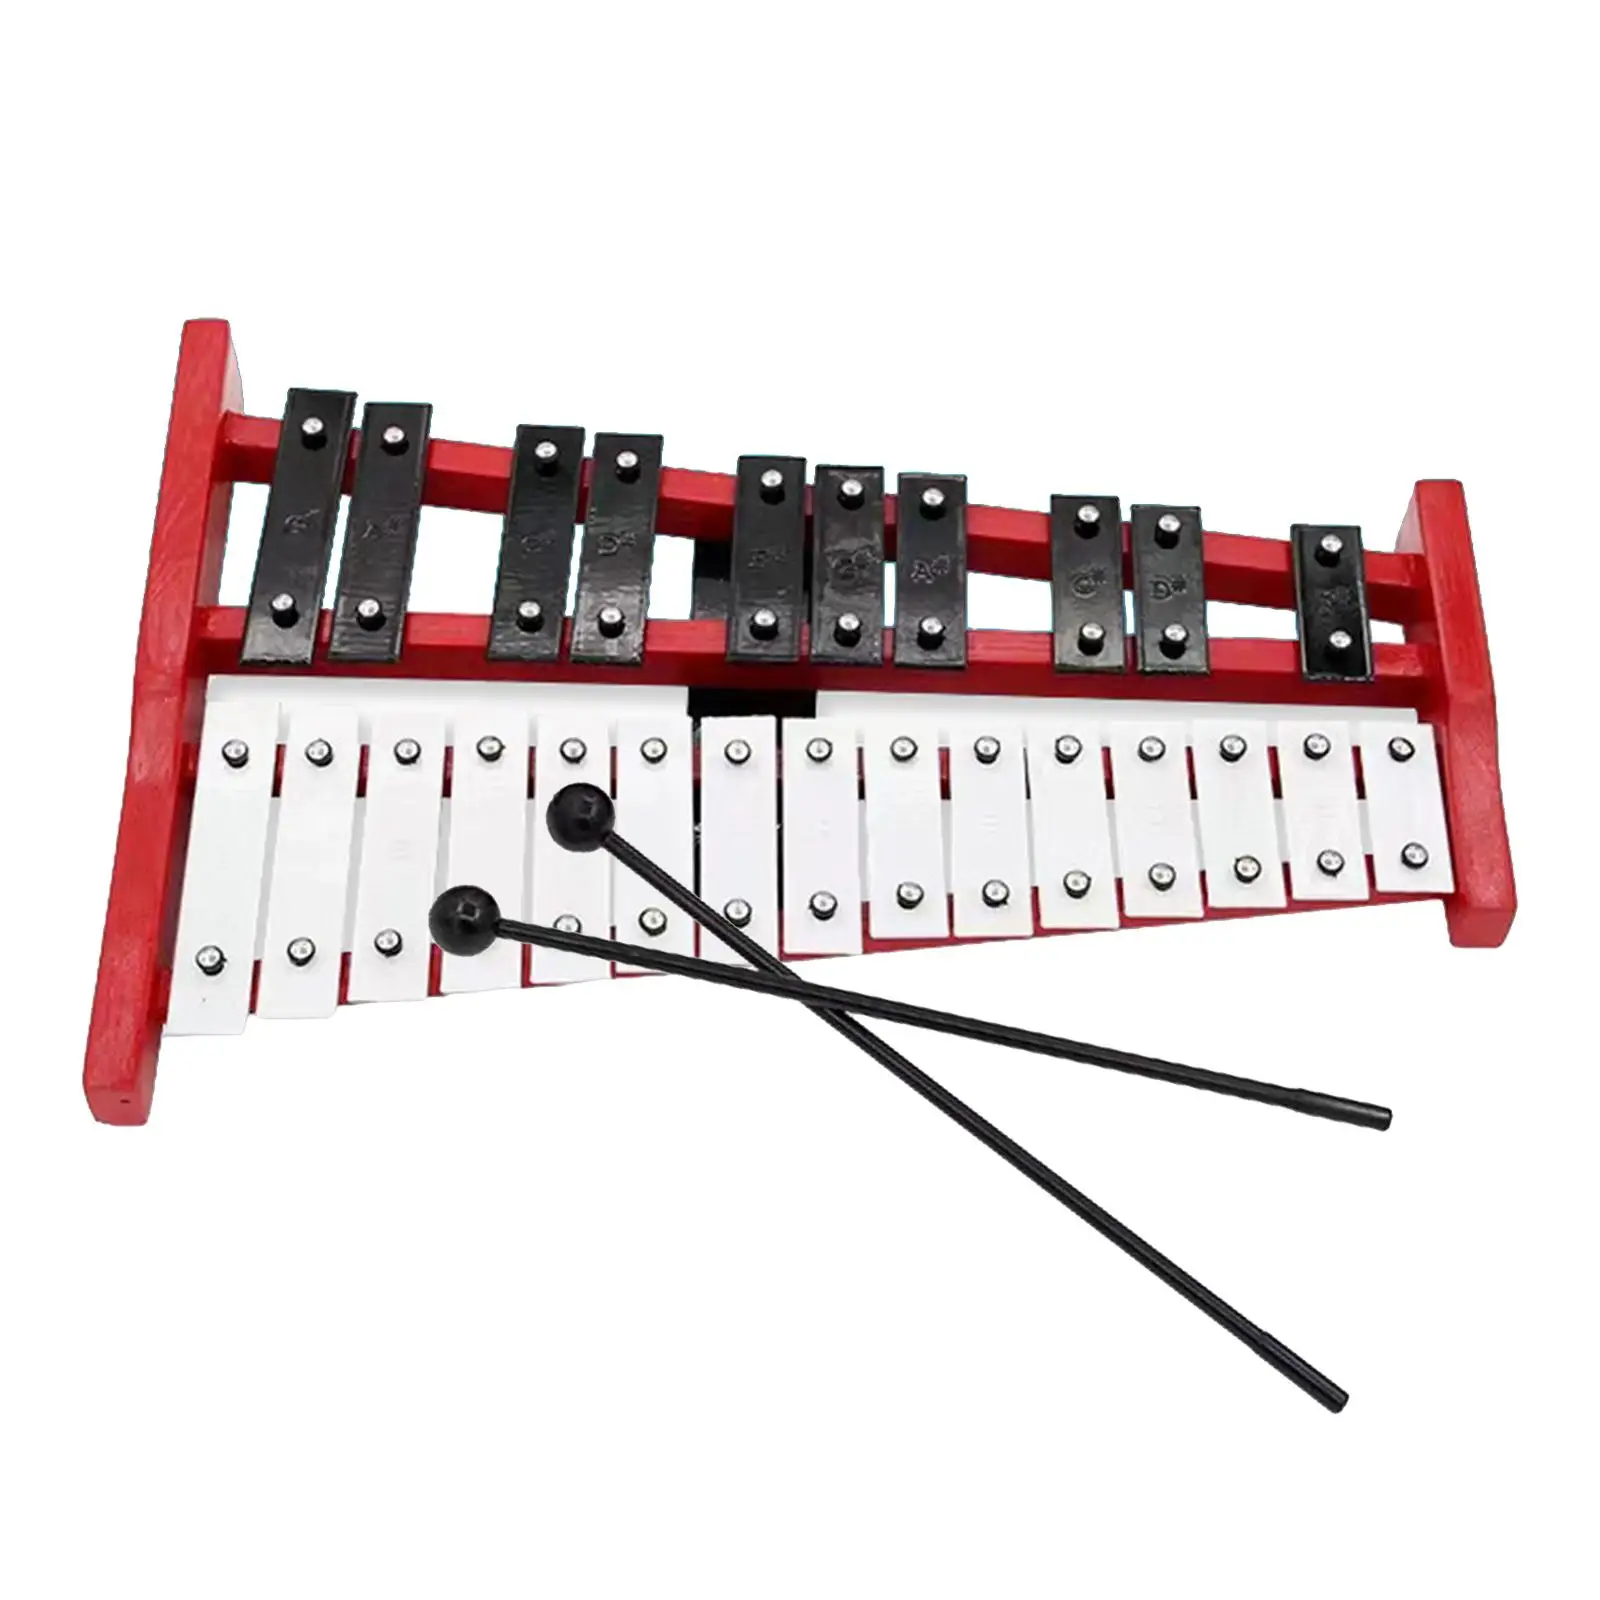 Xylophone for Kids Portable Hand Percussion Percussion Instrument 25 Note for Home School Orchestras Music Lessons Event Outside